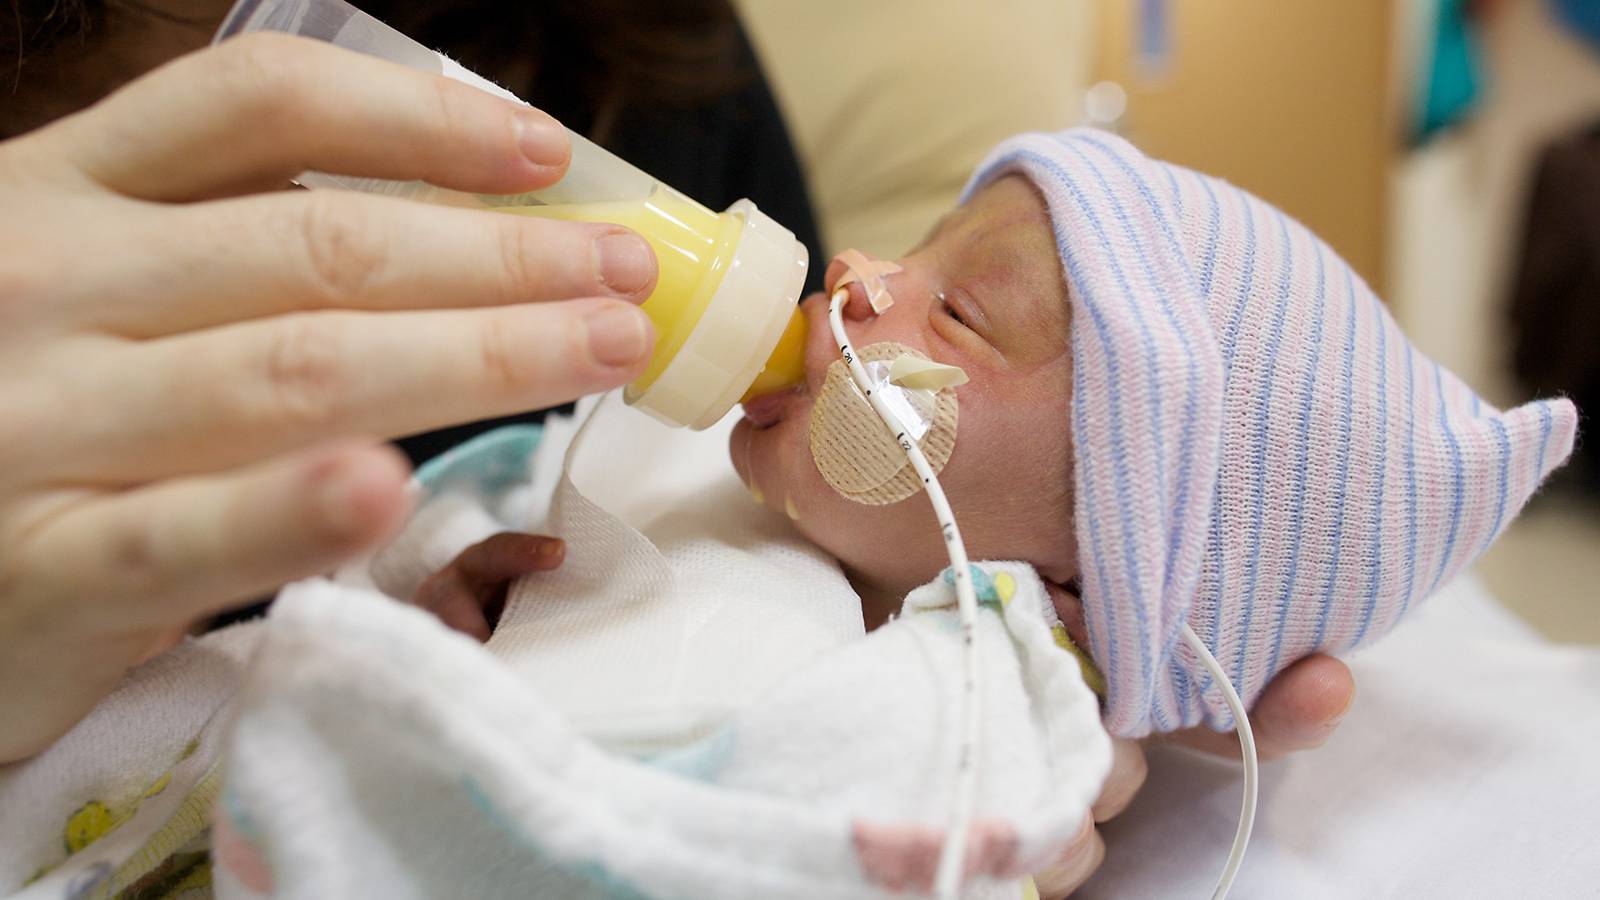 Babies-Born too soon 9 things to expect after your preemie has arrived-2